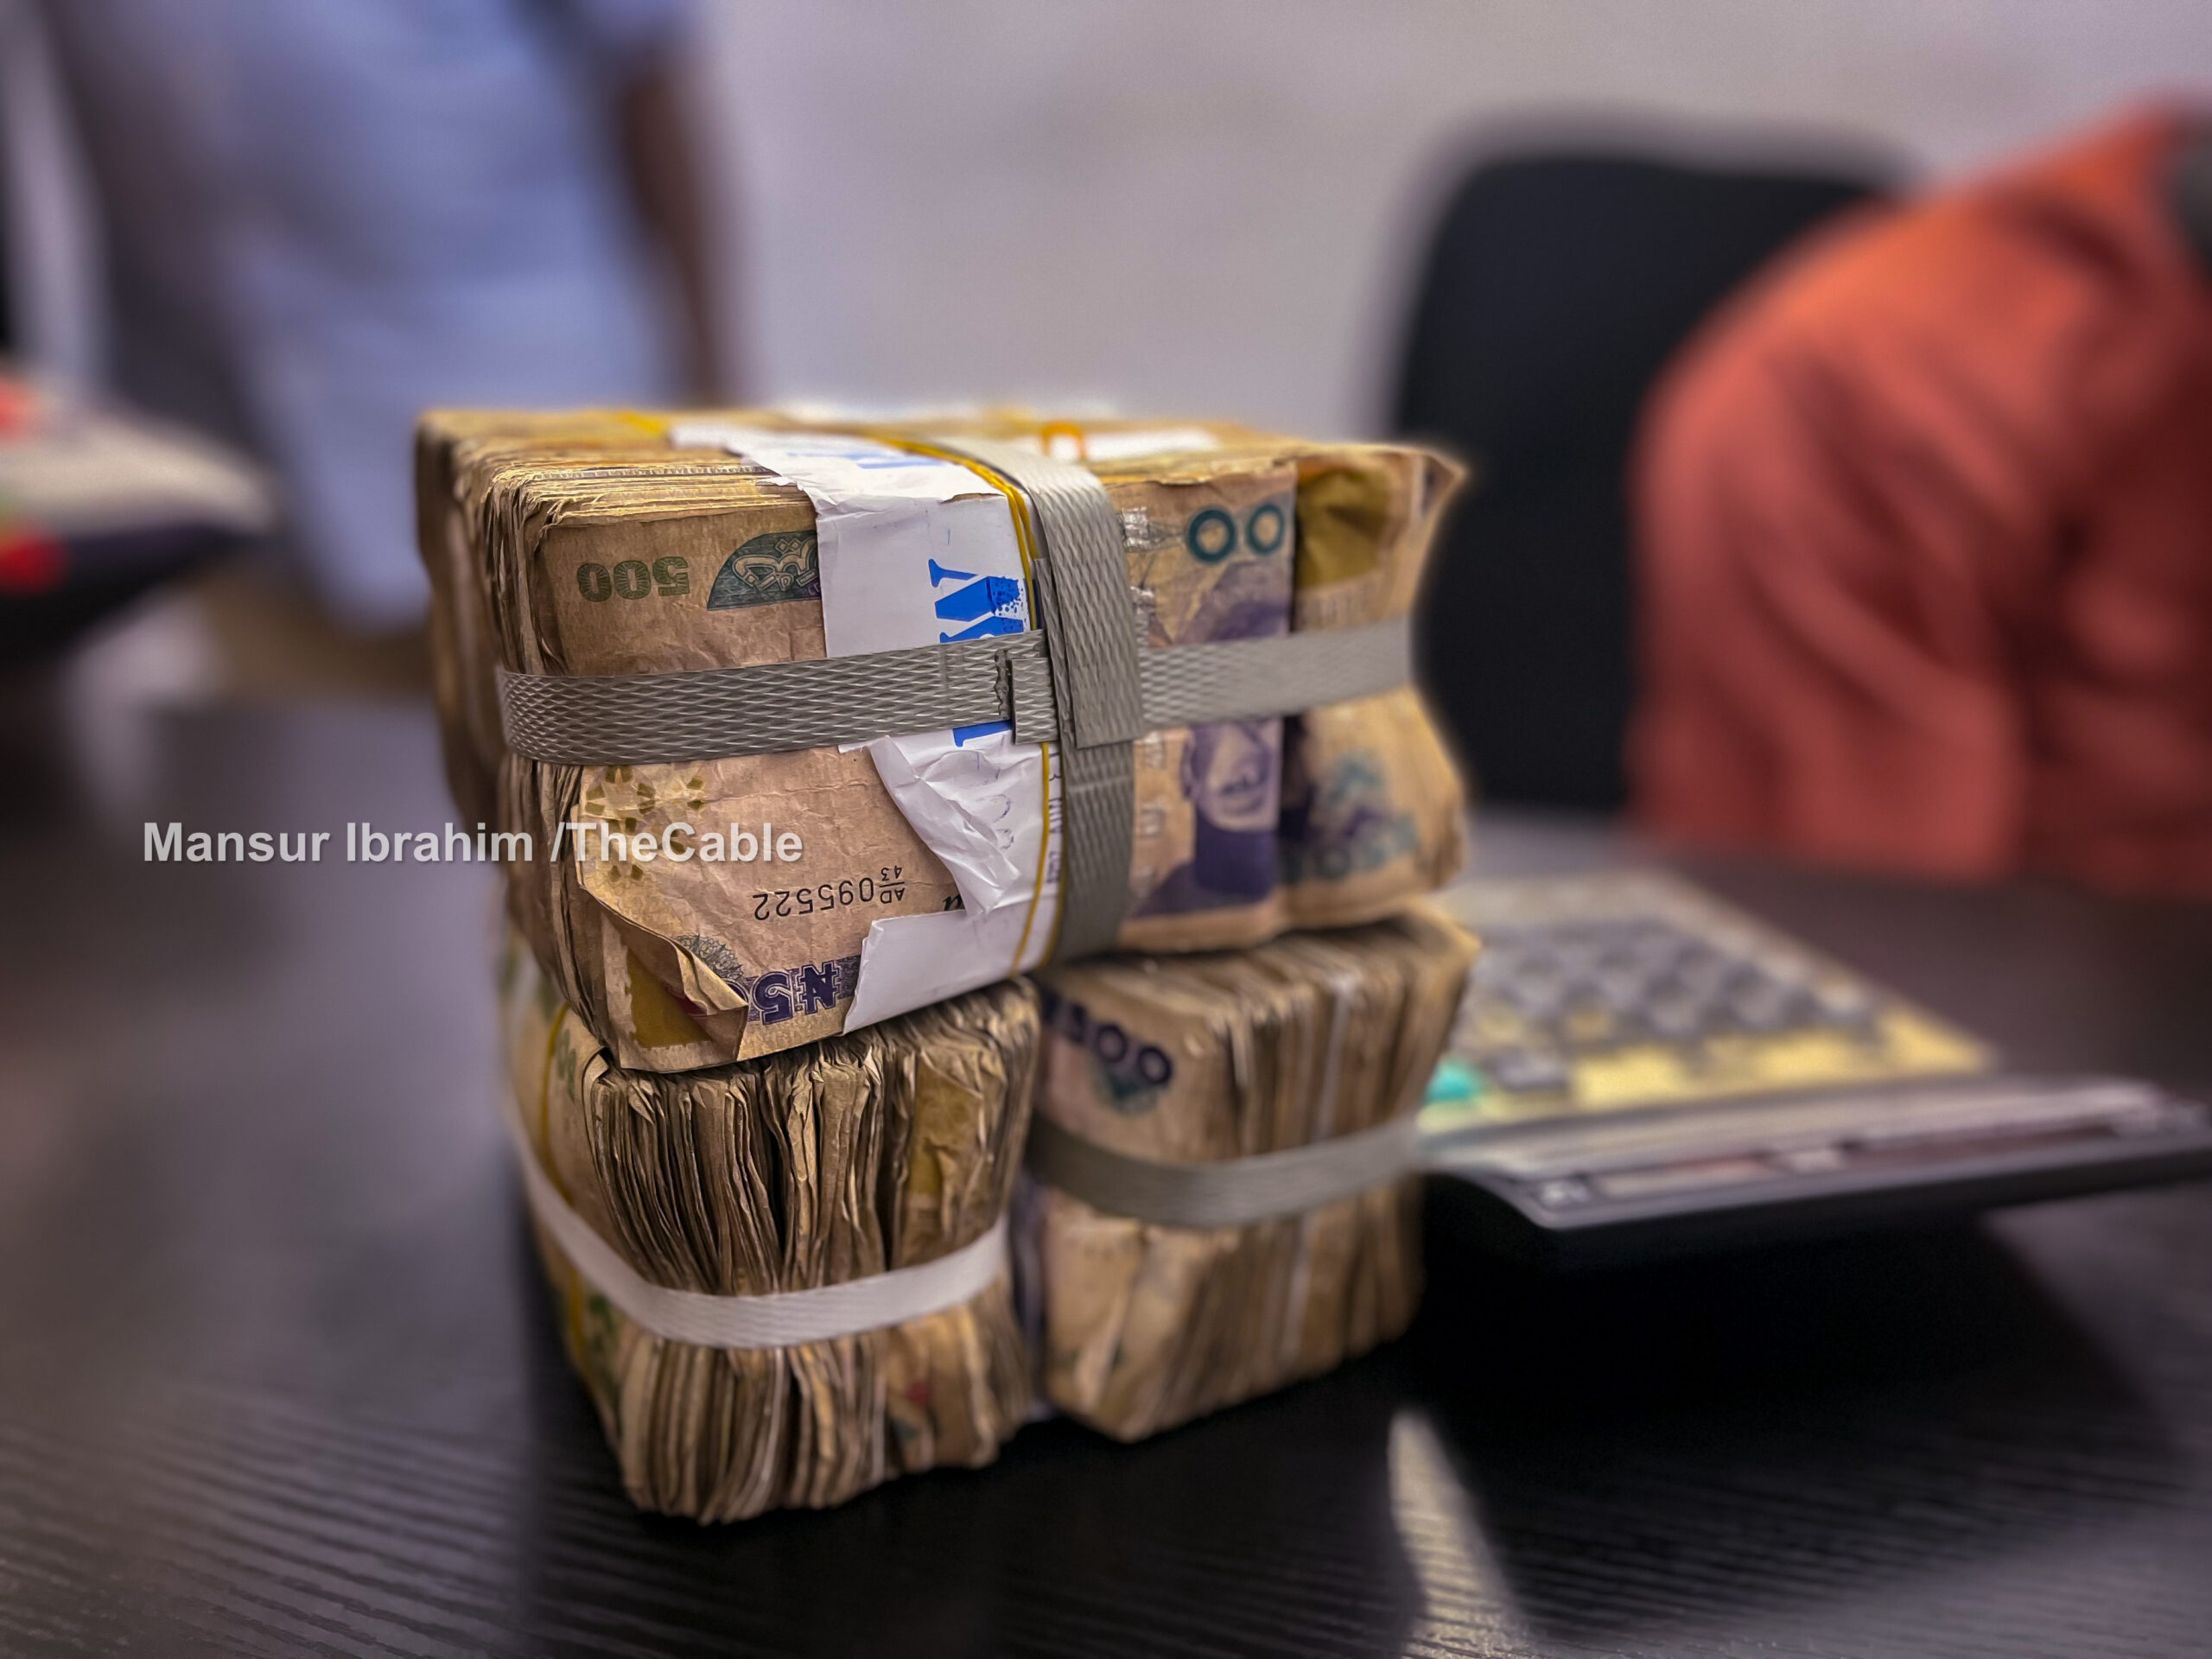 CBN suspends processing fees on large cash deposits